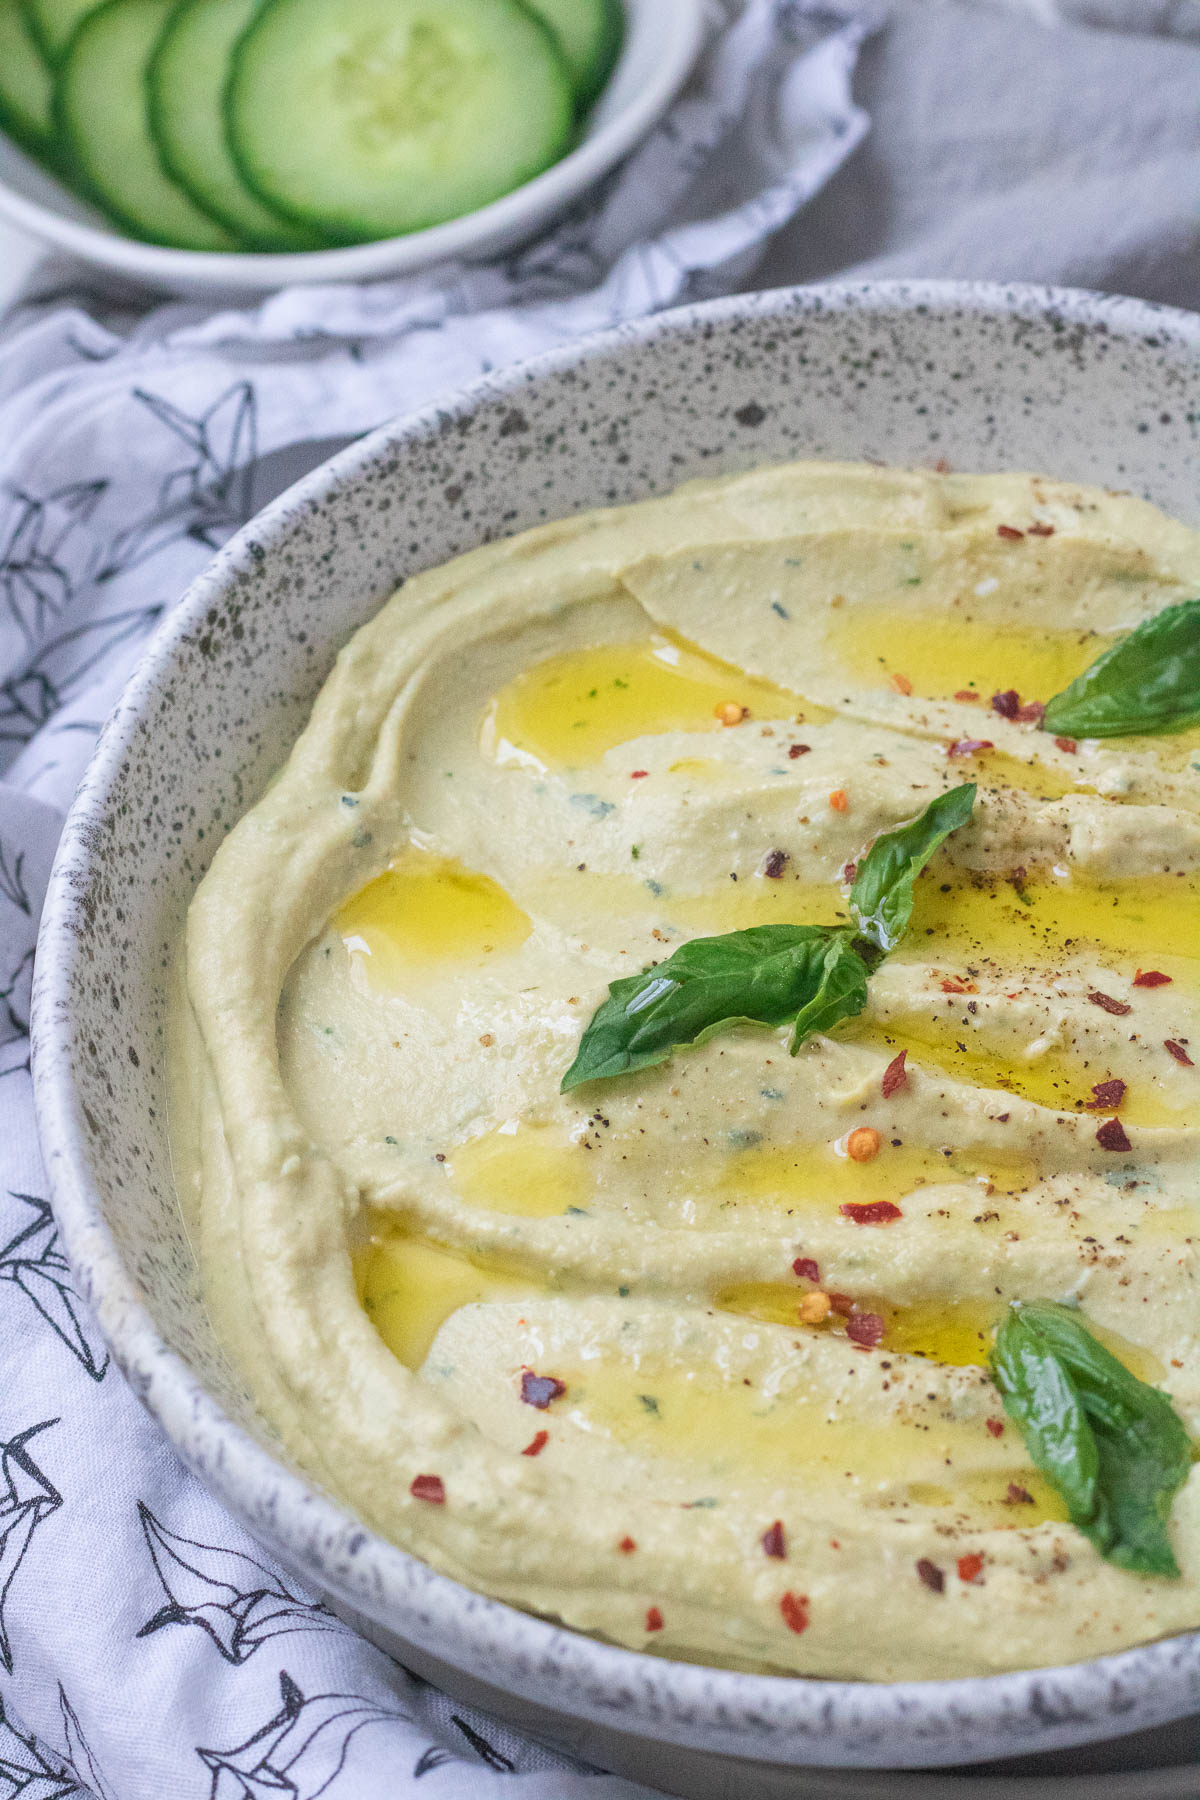 hummus garnished with basil and olive oil in a bowl.